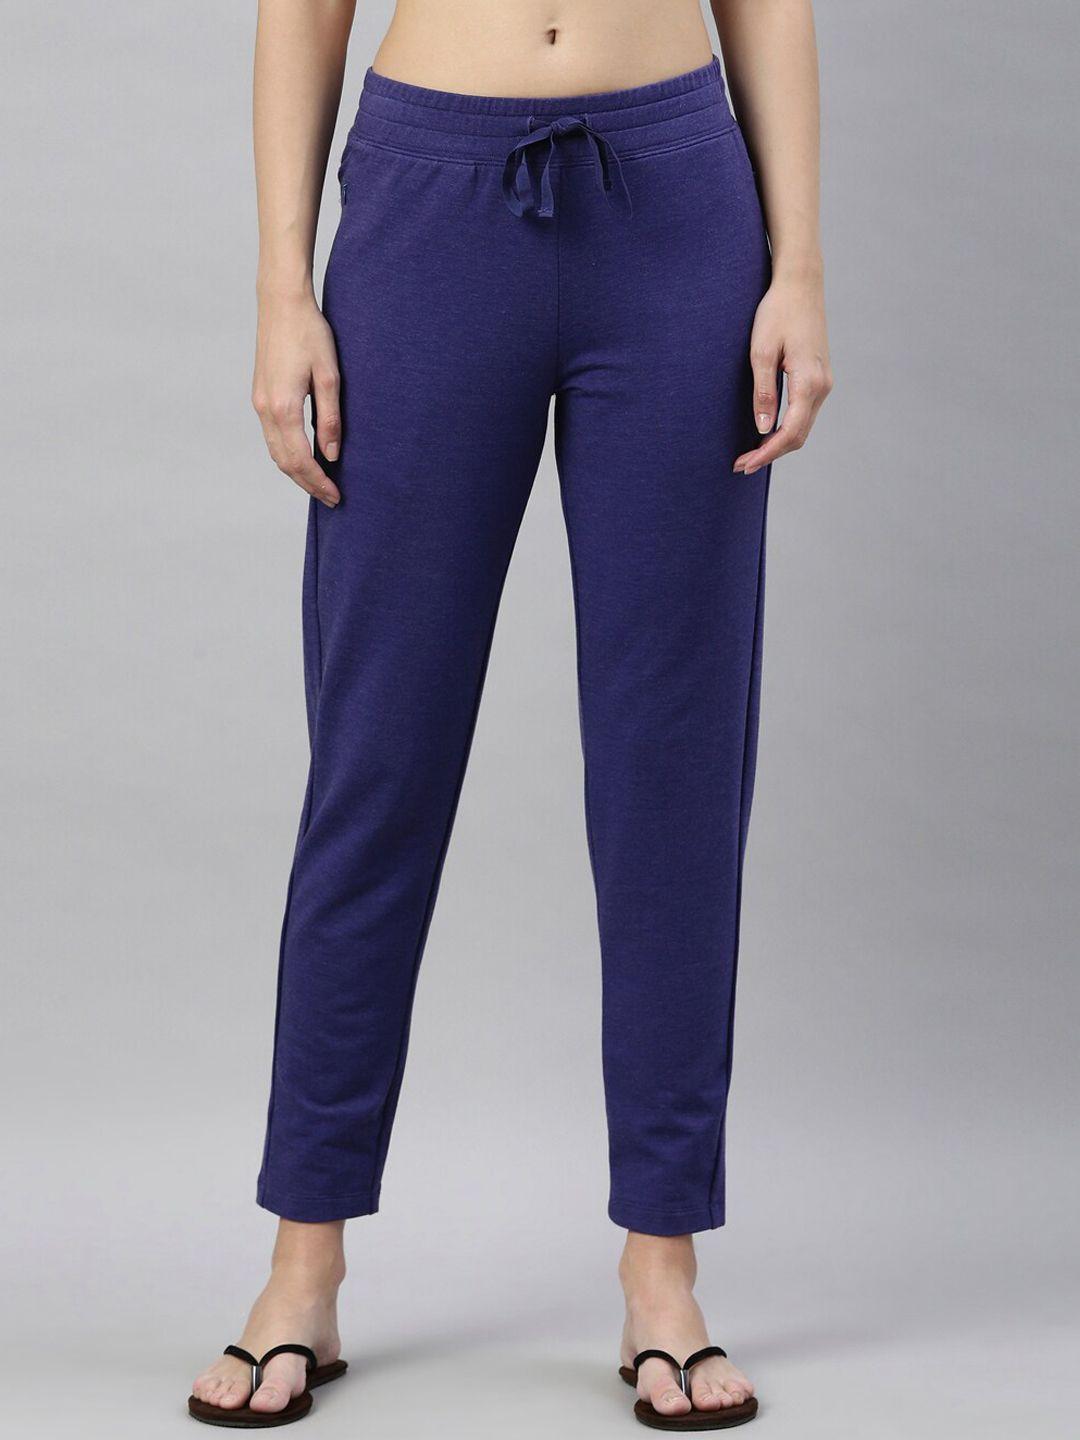 enamor-essentials-women-cotton-slim-fit-mid-rise-french-terry-ankle-length-lounge-pants